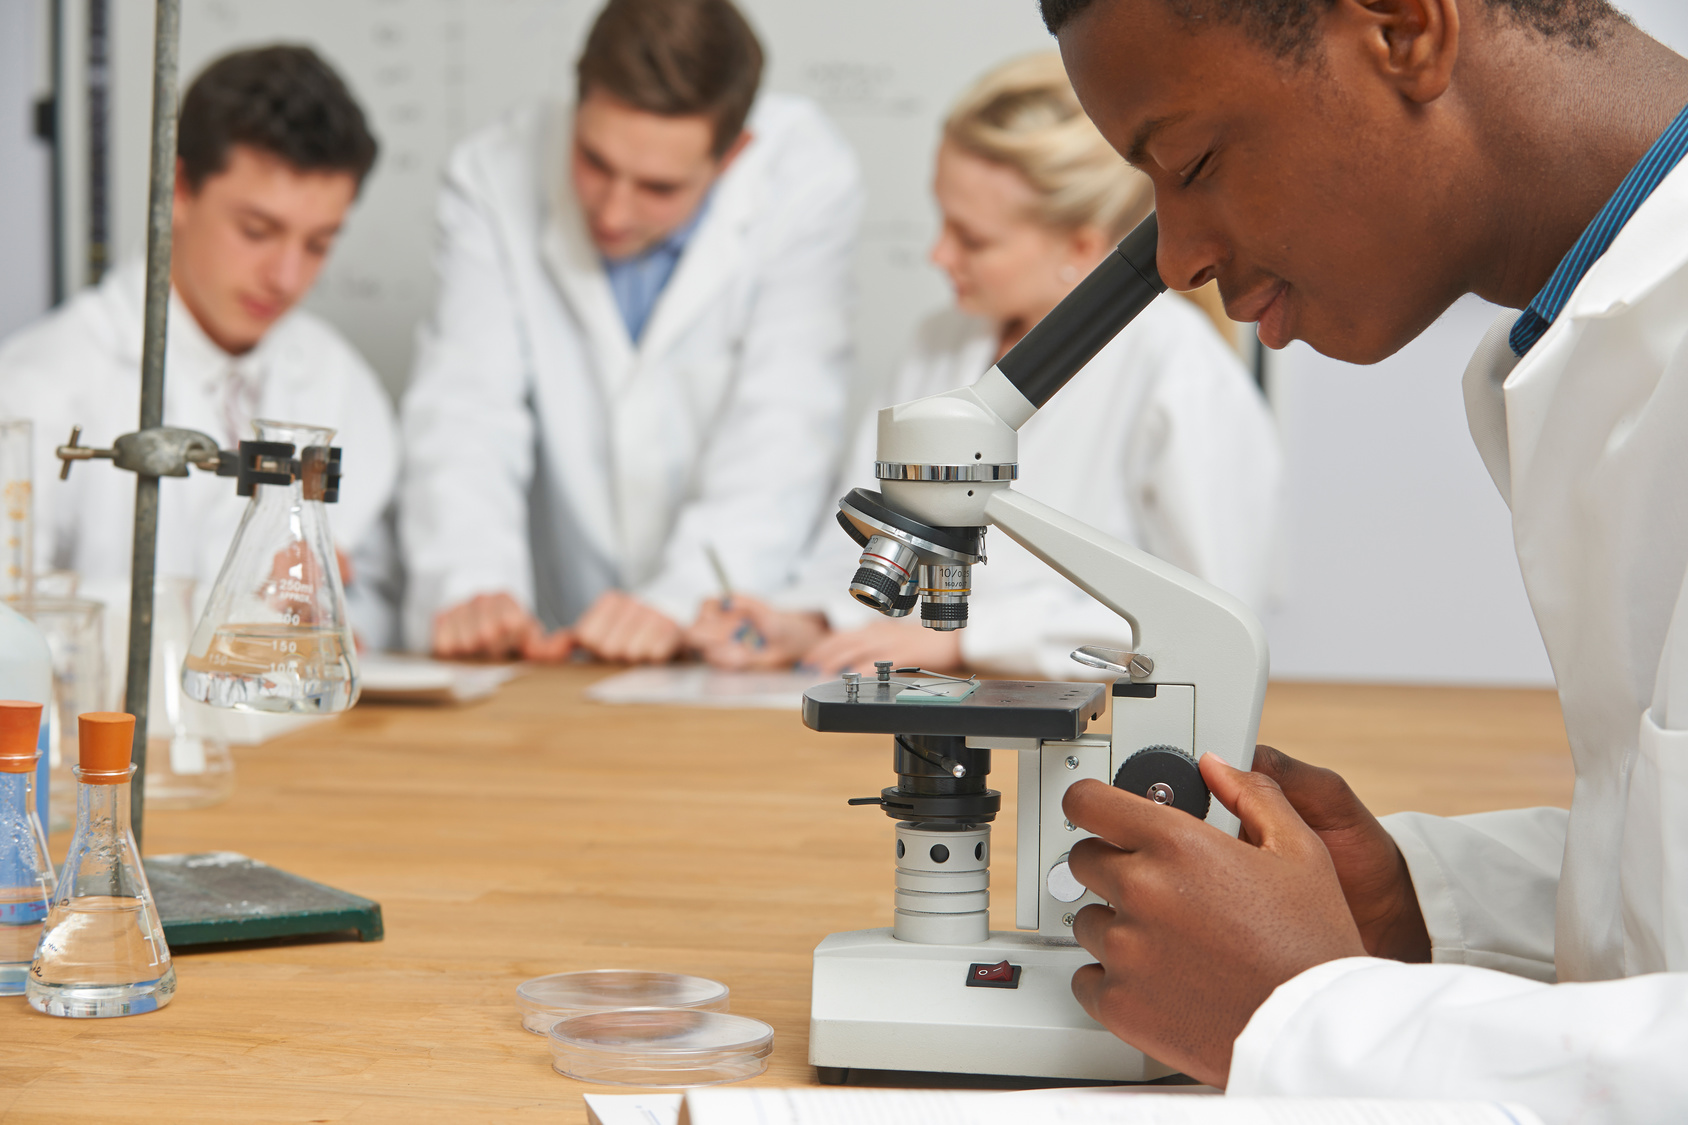 Feds Pay $8M+ to Promote ‘Diversity’ in STEM